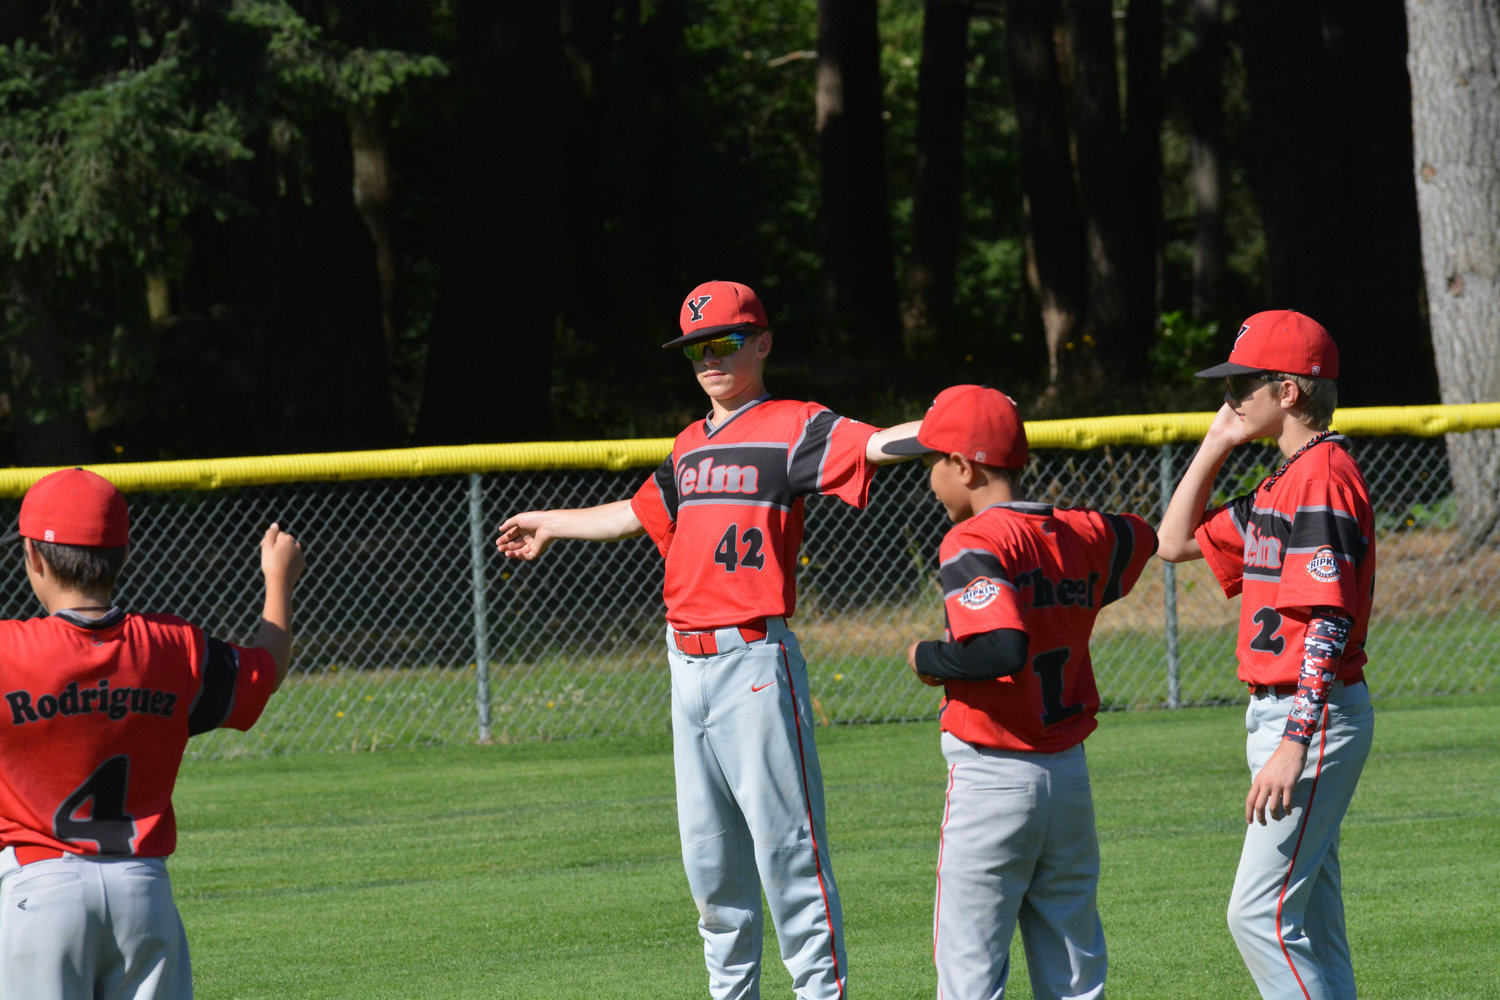 Four members of the Nisqually Basin 12U Yelm All Star team loosen up their shoulders before practice begins.